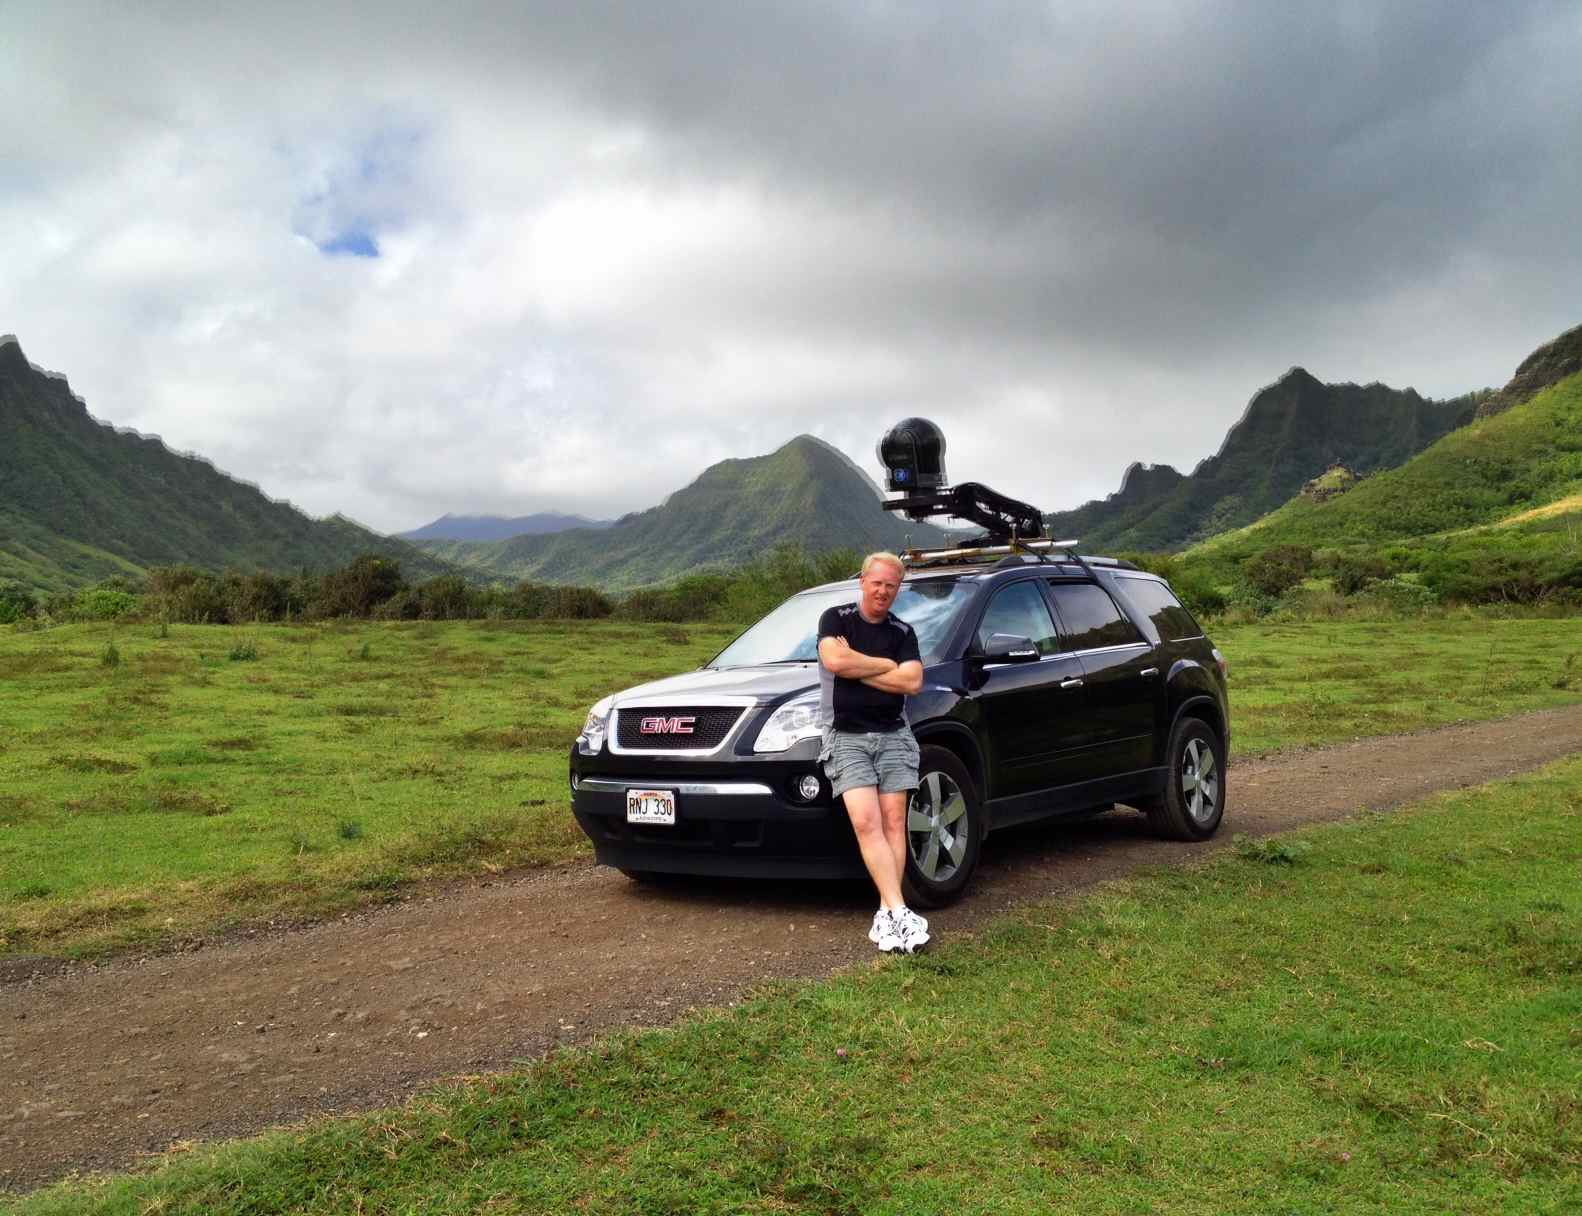 Thomas Miller - Aerial Cinematographer On location in Hawaii with Cineflex and Airfilm Uni-Mount. 2011